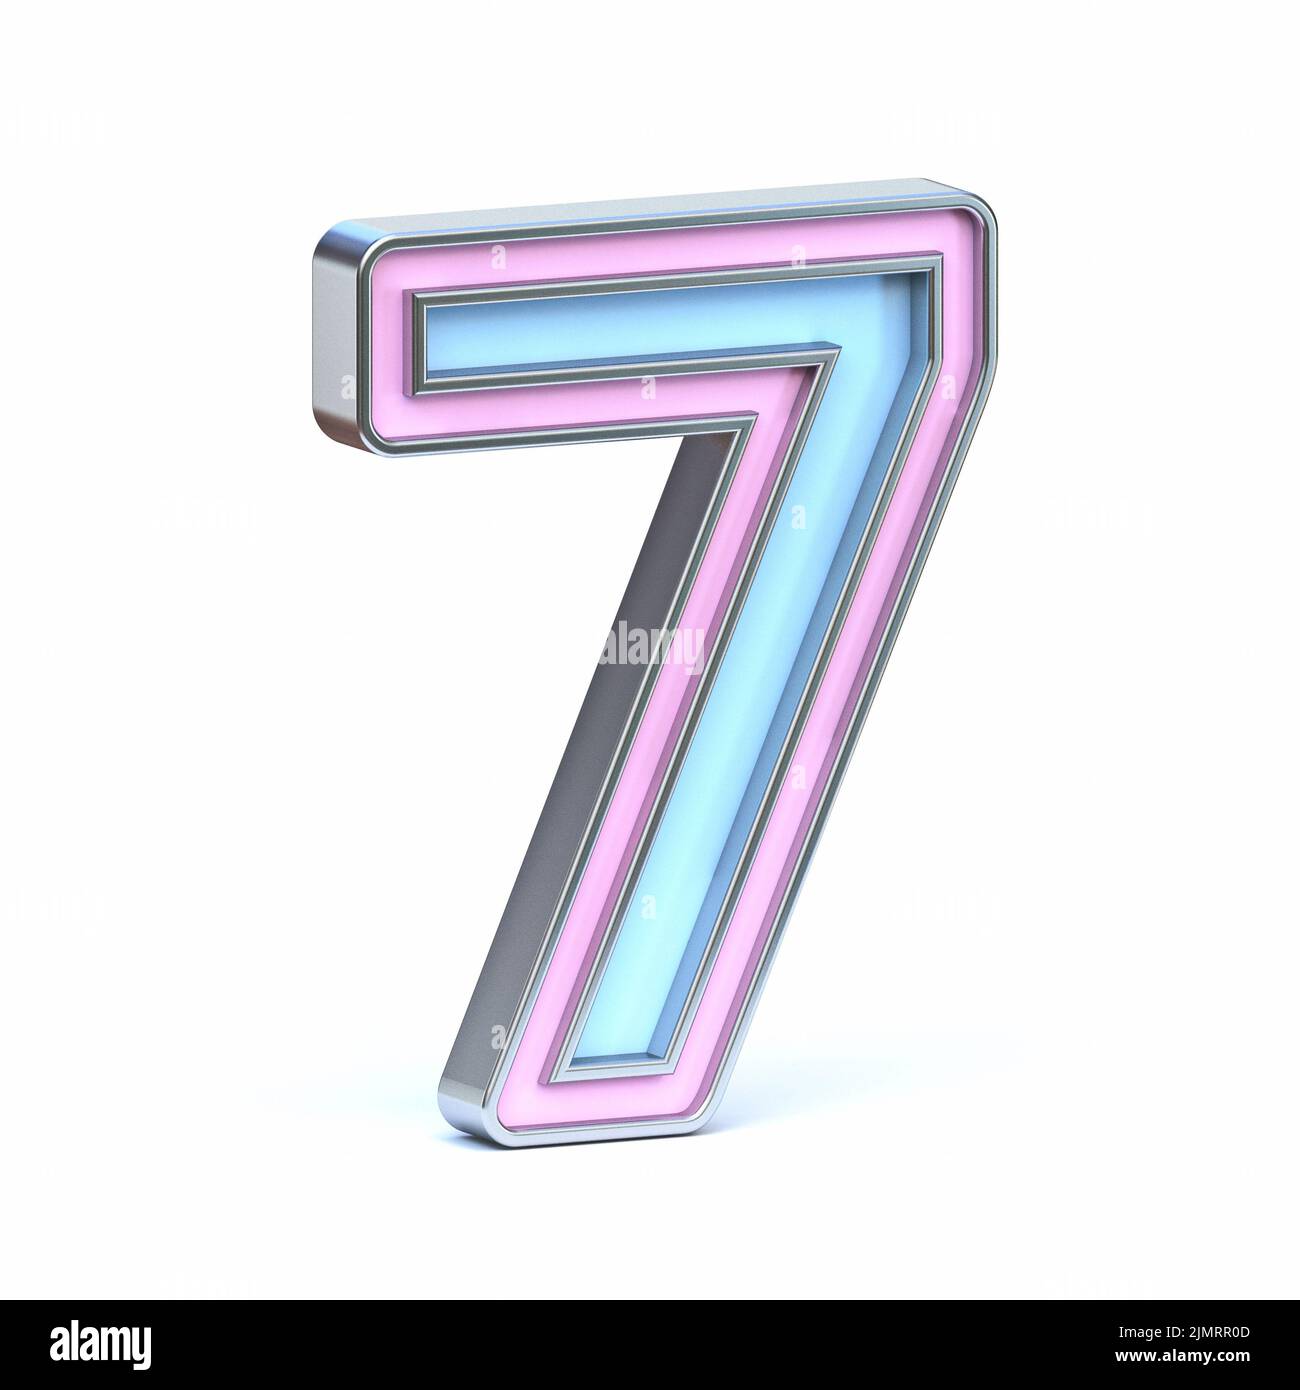 Blue and pink metal font Number 7 SEVEN 3D Stock Photo